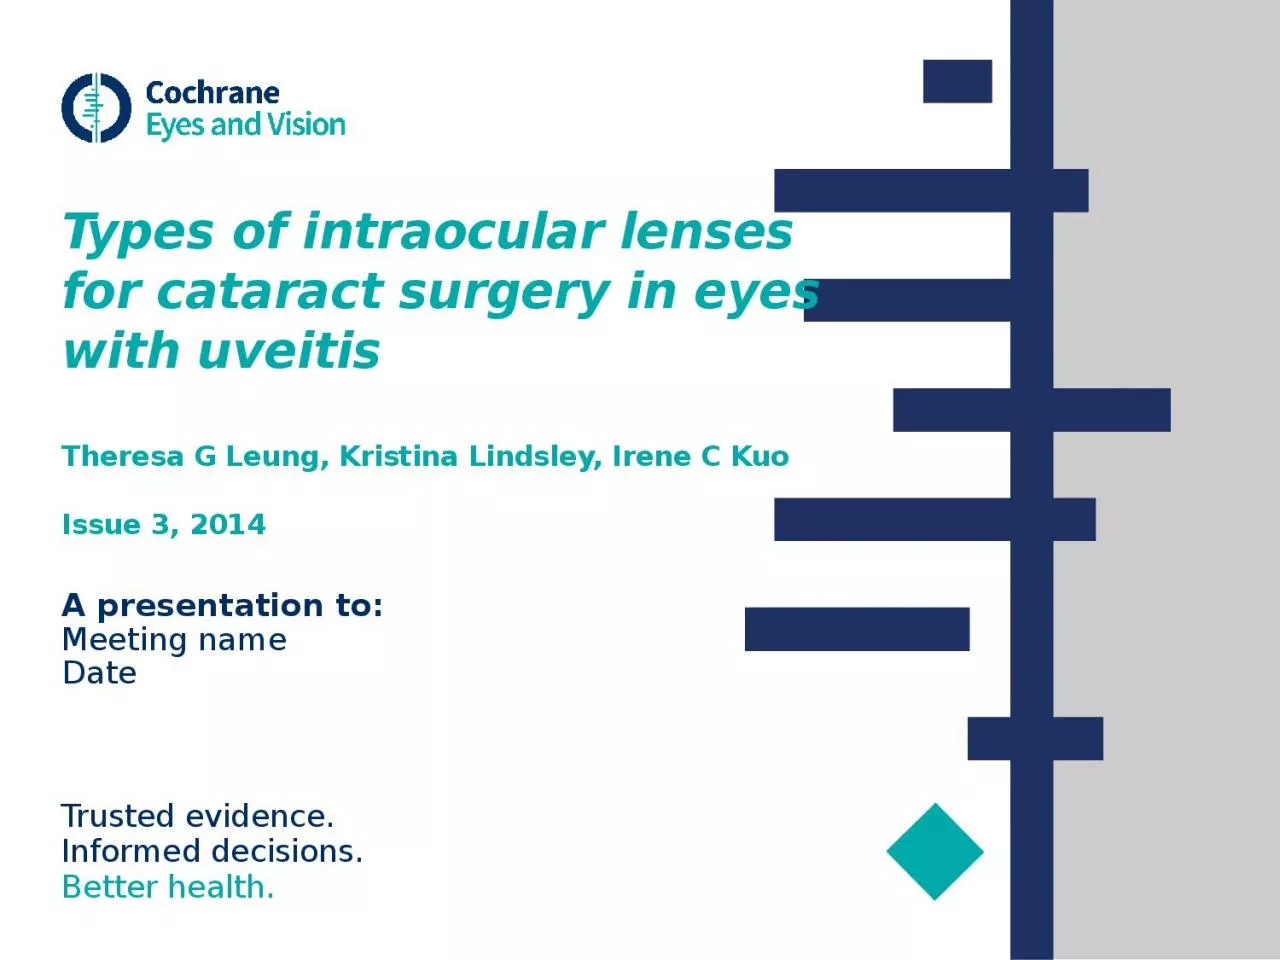 Types of intraocular lenses for cataract surgery in eyes with uveitis